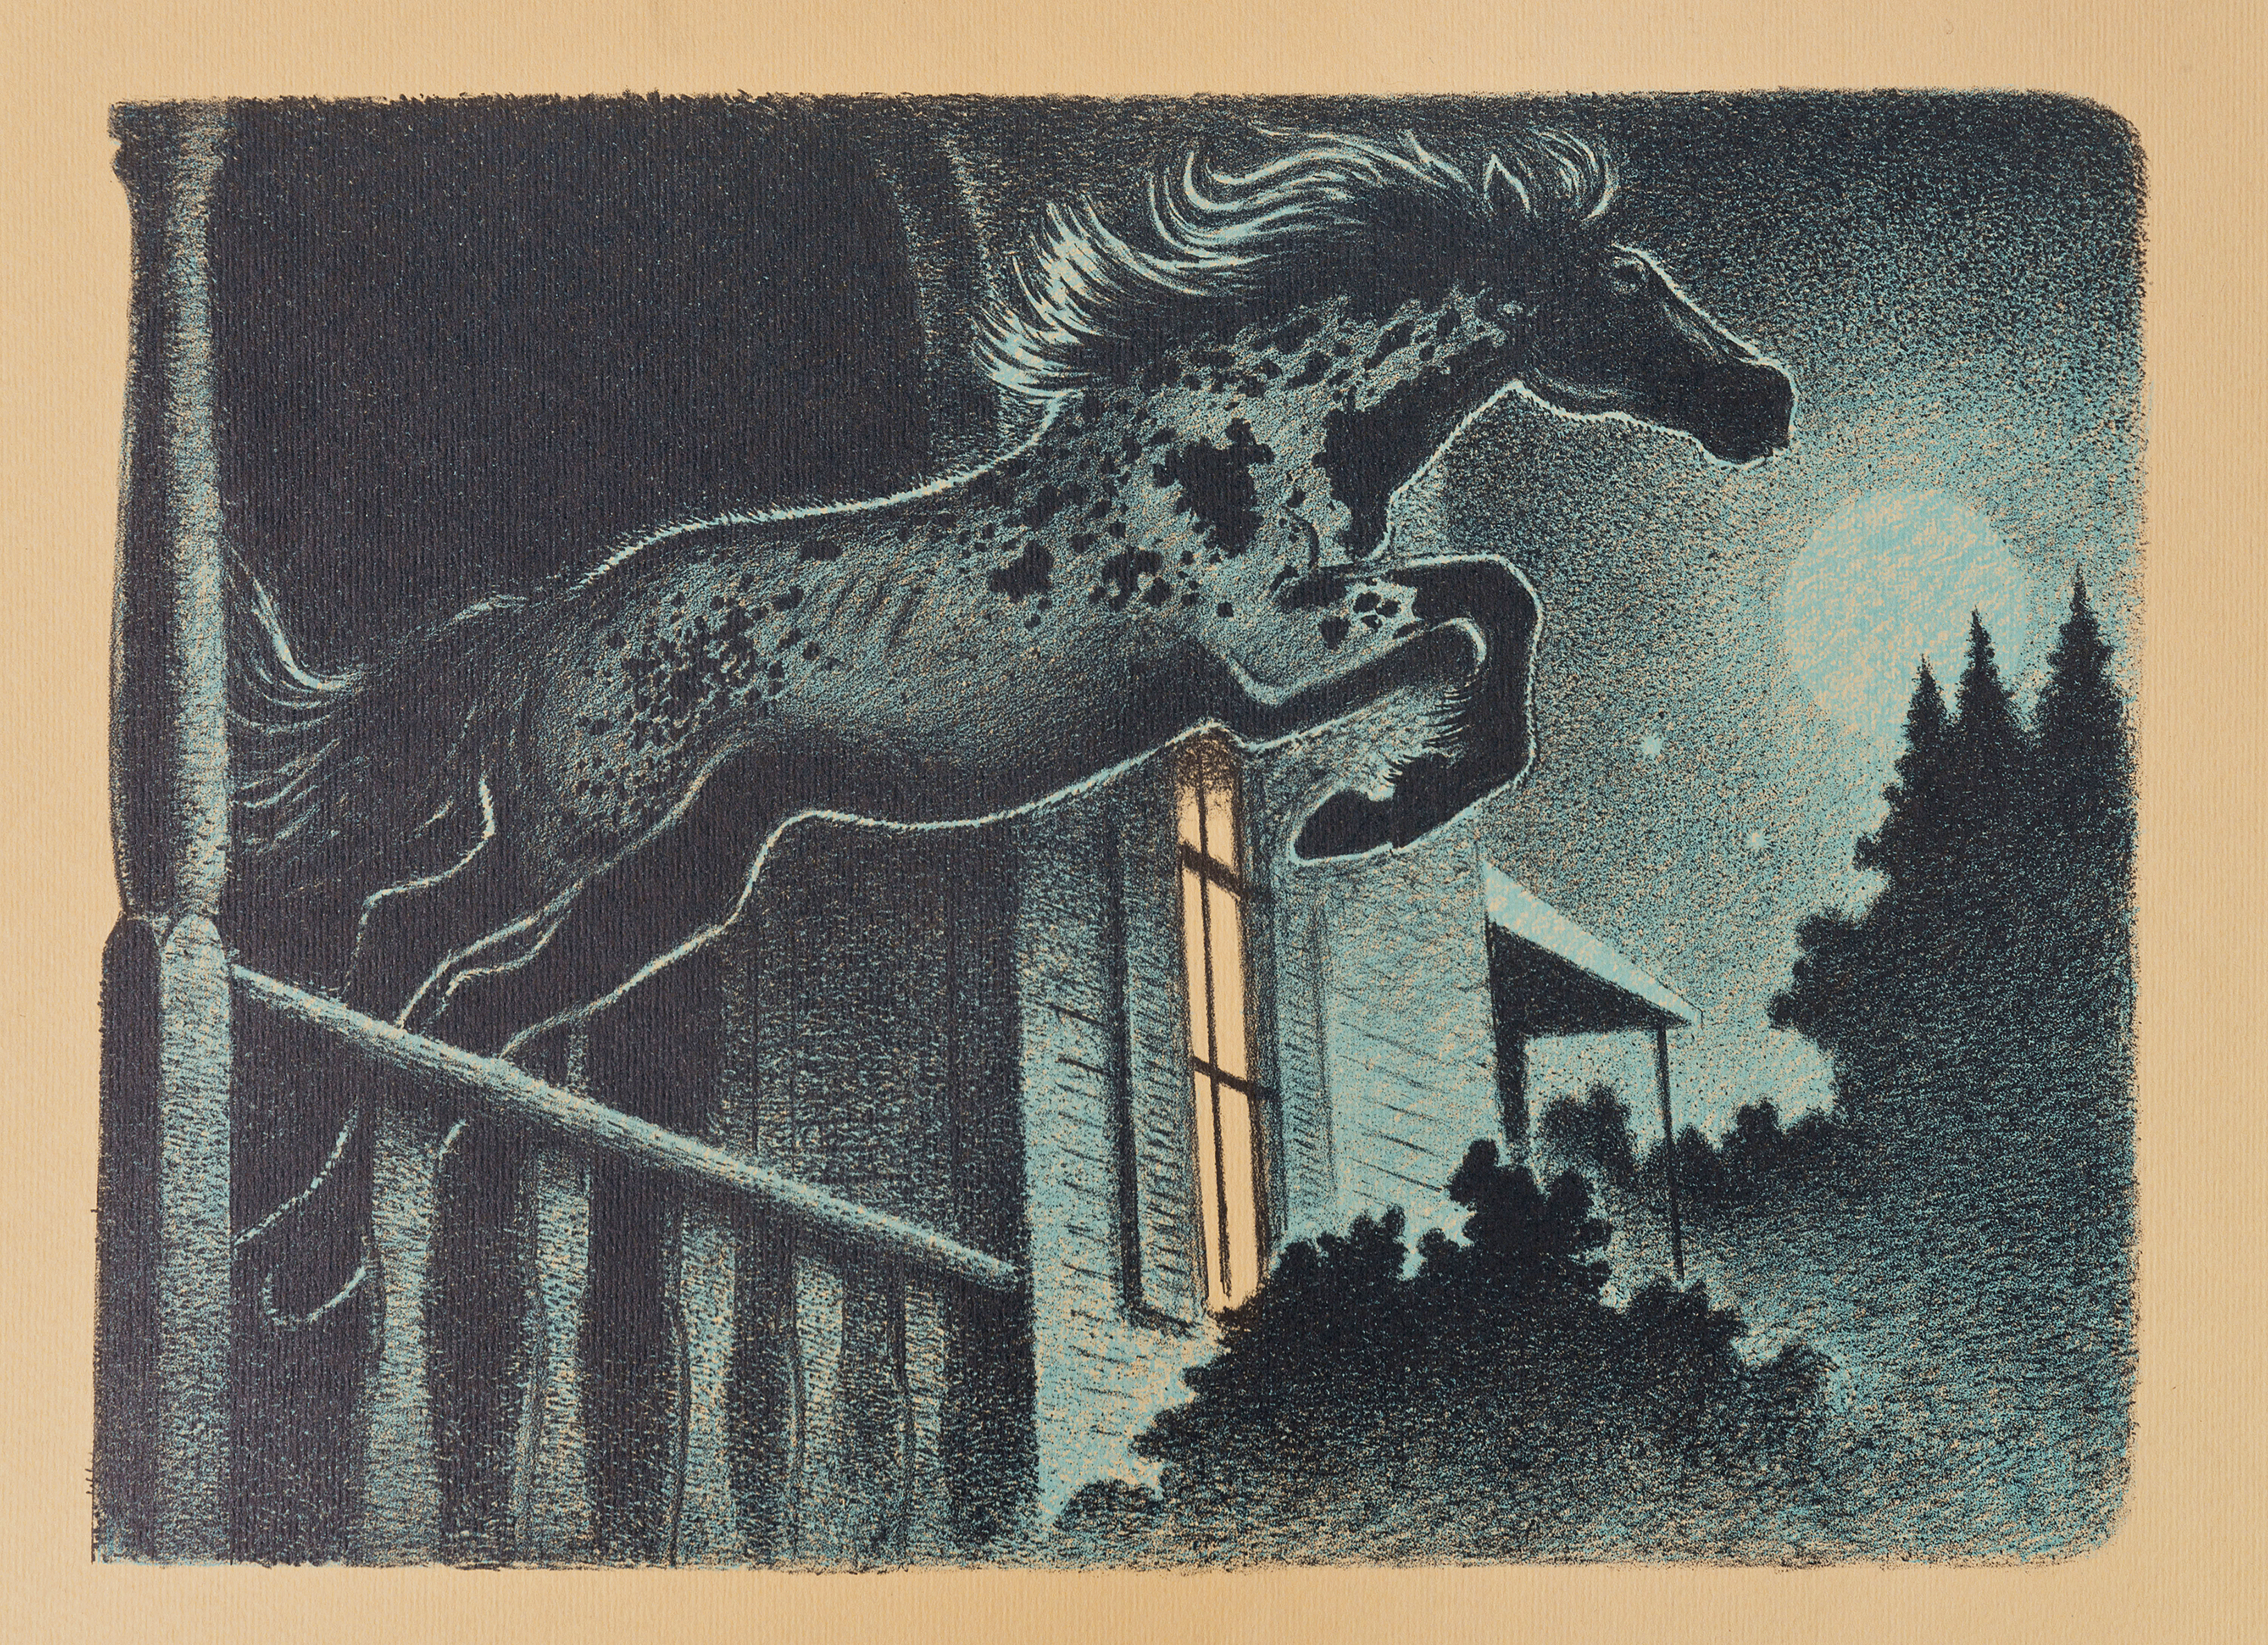 “Hobgoblin Horse,” lithograph. This image is from the USC Press’ limited edition of “Spotted Horses” by William Faulkner and depicts the horse that ran into Mrs. Littlejohn’s house following the mustang escape from the auction lot. The text says, “The horse whirled around without breaking or pausing. It galloped to the end of the veranda and took the railing and soared outward, hobgoblin and floating, in the moon.”
Used with permission from A View from the South: The Narrative Art of Boyd Saunders by Thomas Dewey II and published by the University of South Carolina Press © 2019, University of South Carolina, Columbia.